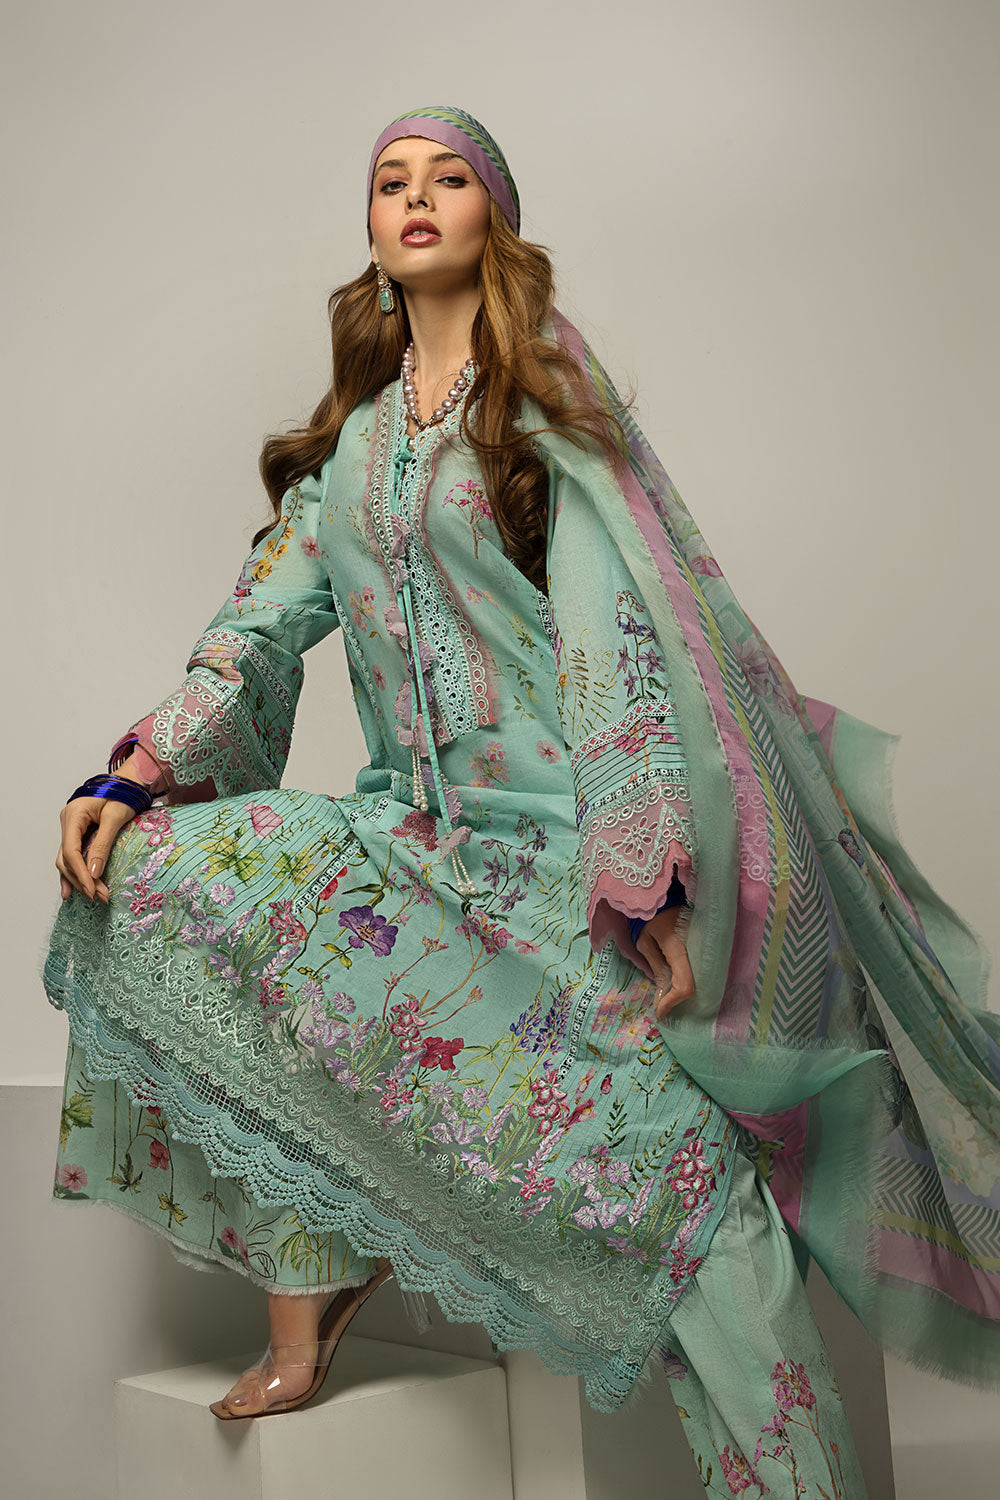 Buy Now, D#6A - Sobia Nazir Vital 2023 - Vol. 2 - Shahana Collection UK  - Wedding and Bridal Party Dresses - Sobia Nazir in UK - Summer Lawn 2023